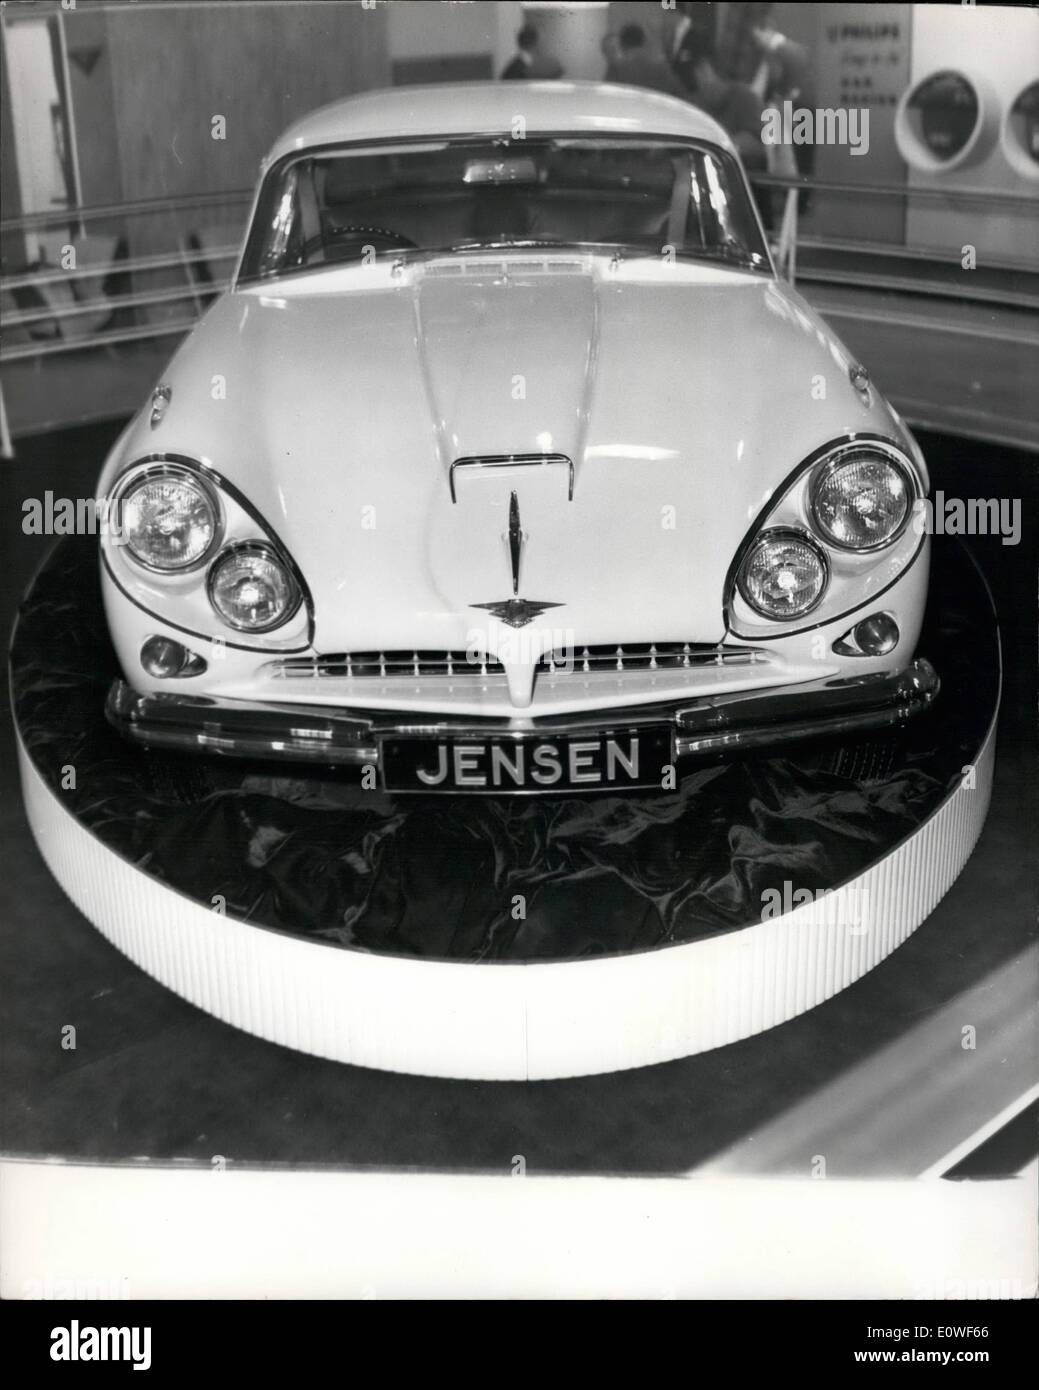 Oct. 10, 1962 - Jensen at Earls Court Motor Show; Photo Shows The Jensen for 1963 pictured at Earls Court London, where the annual motor show opens tomorrow. With a Chrysler VS engine, it is capable of 140 miles an hour. The Price: 3,860. Stock Photo